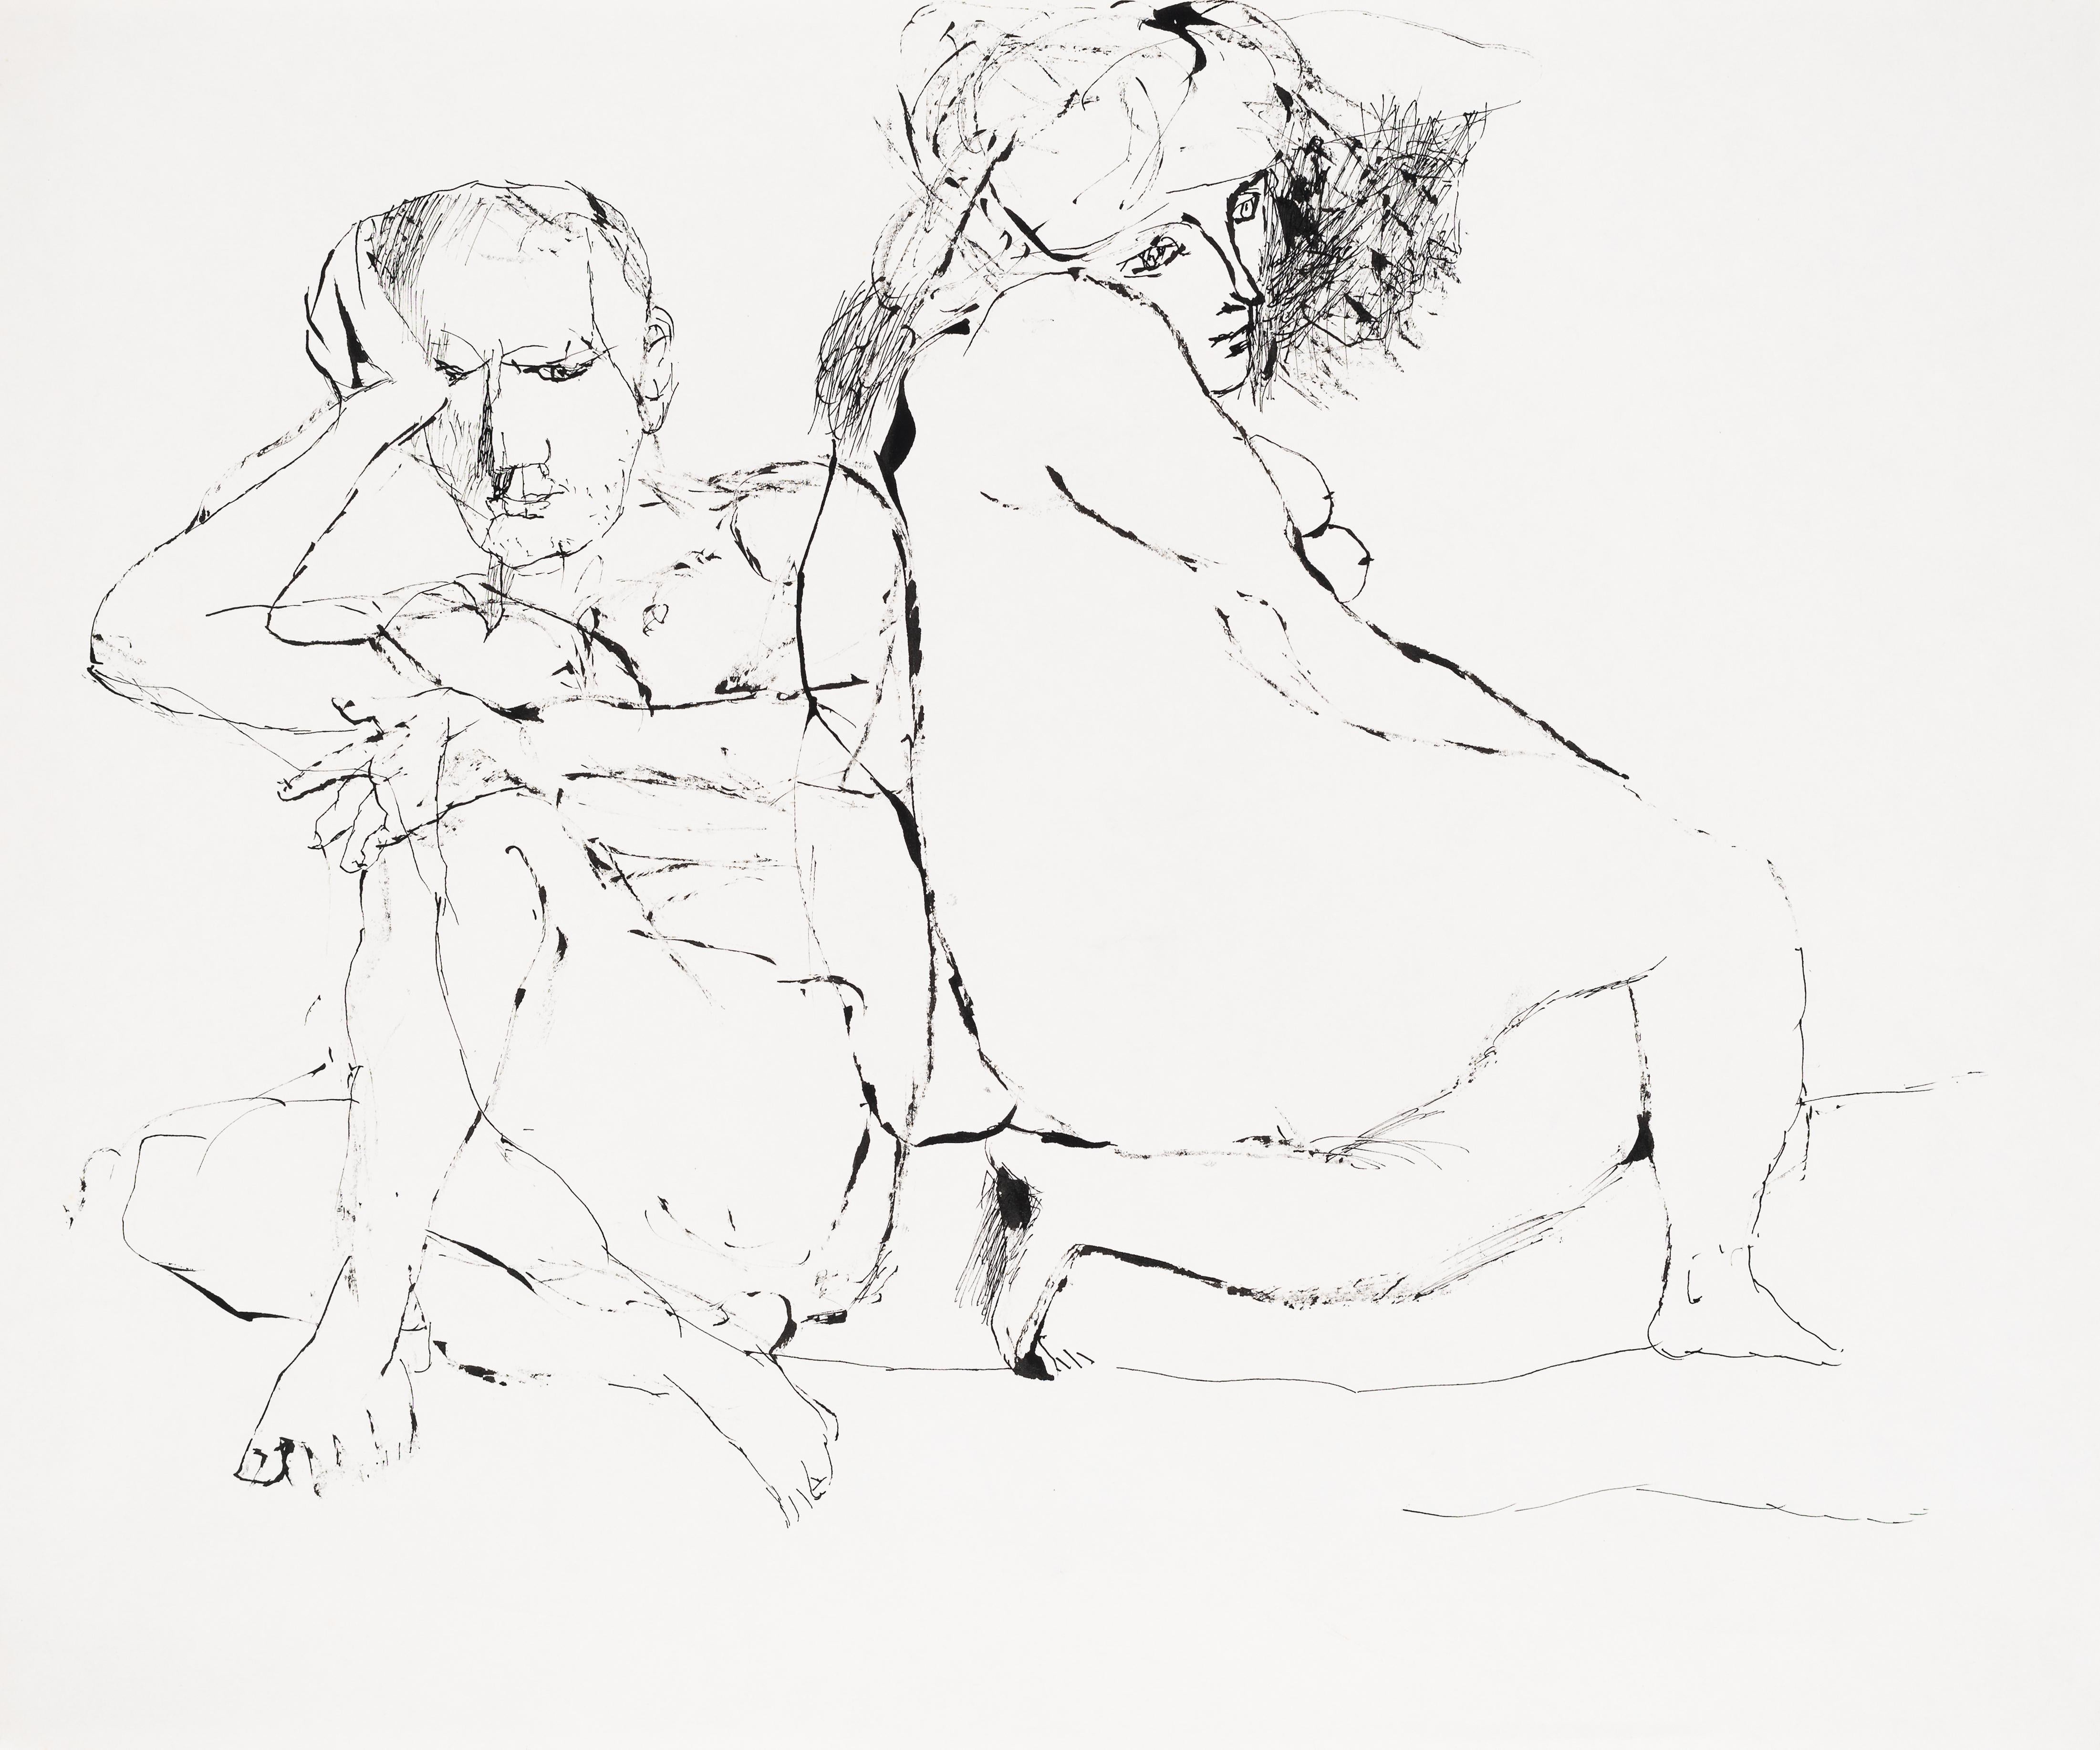 The couple / Disillusion - Lajos Szalay, 20th Century, Figurative drawing